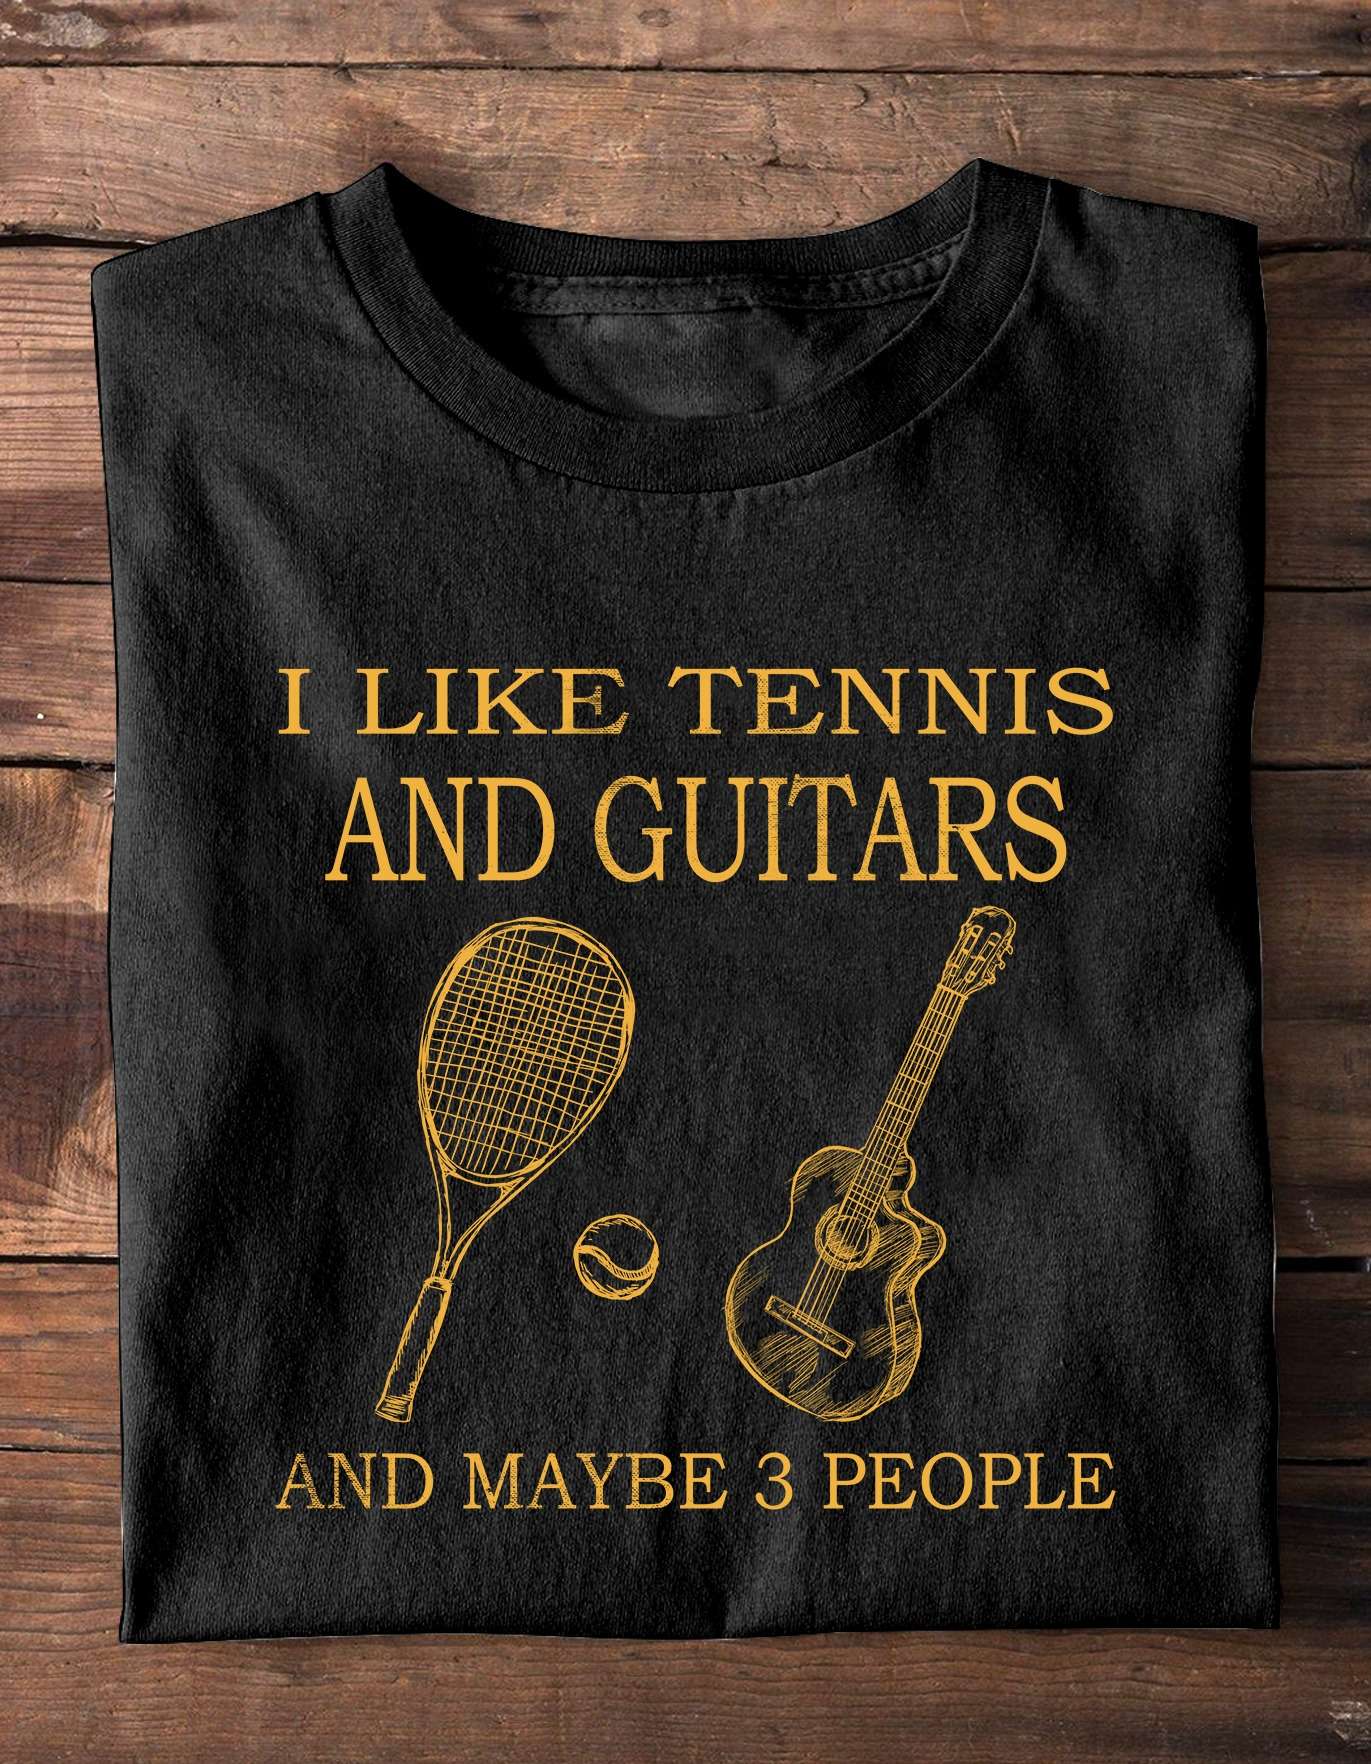 I like tennis and guitars and maybe 3 people - The guitarist